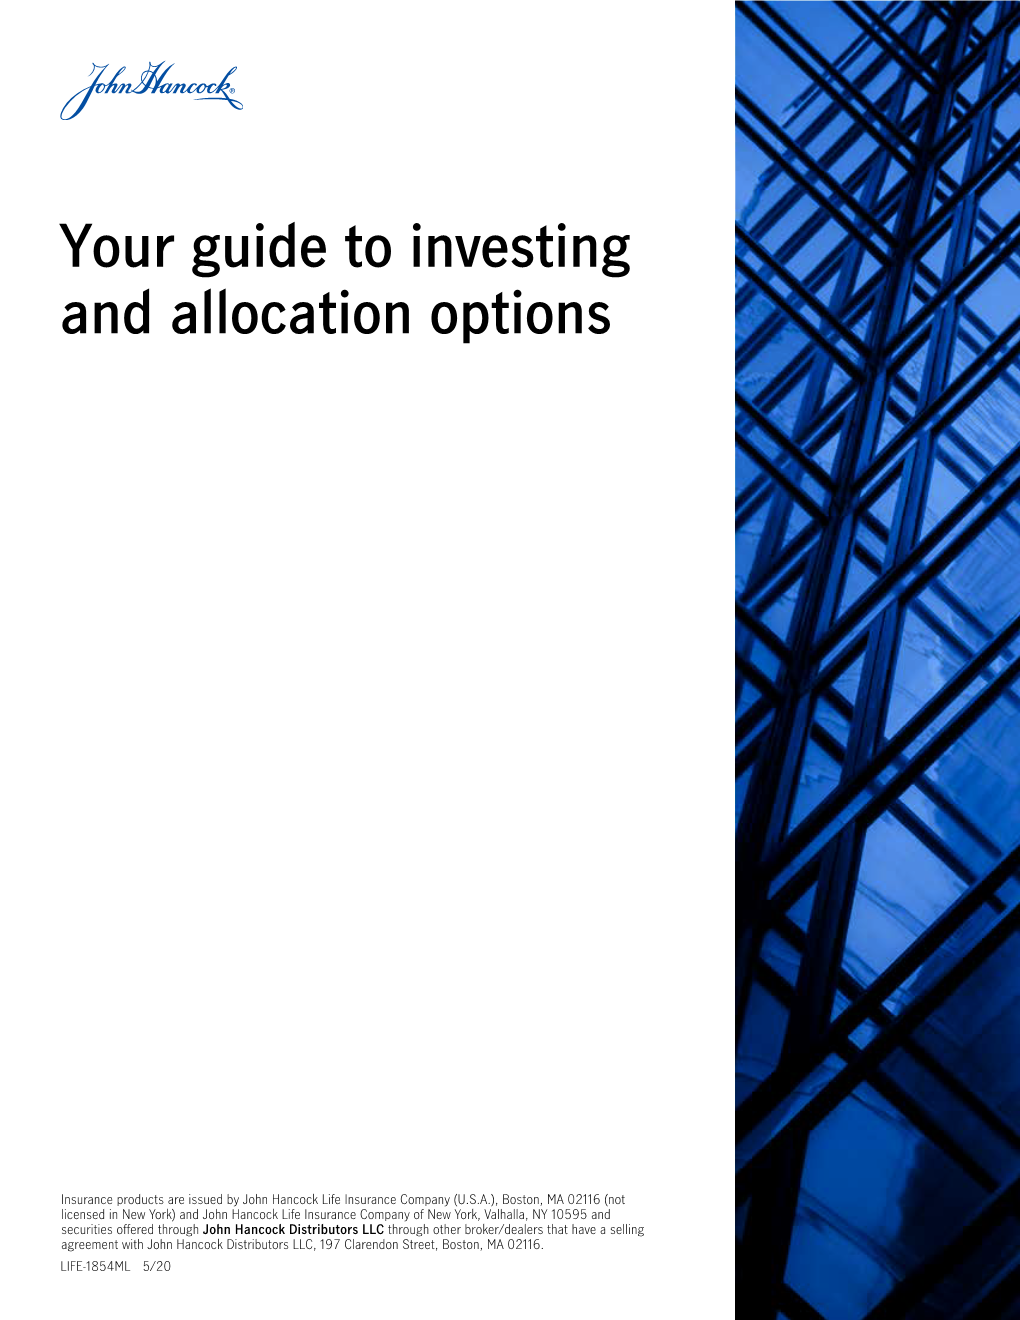 Your Guide to Investing and Allocation Options